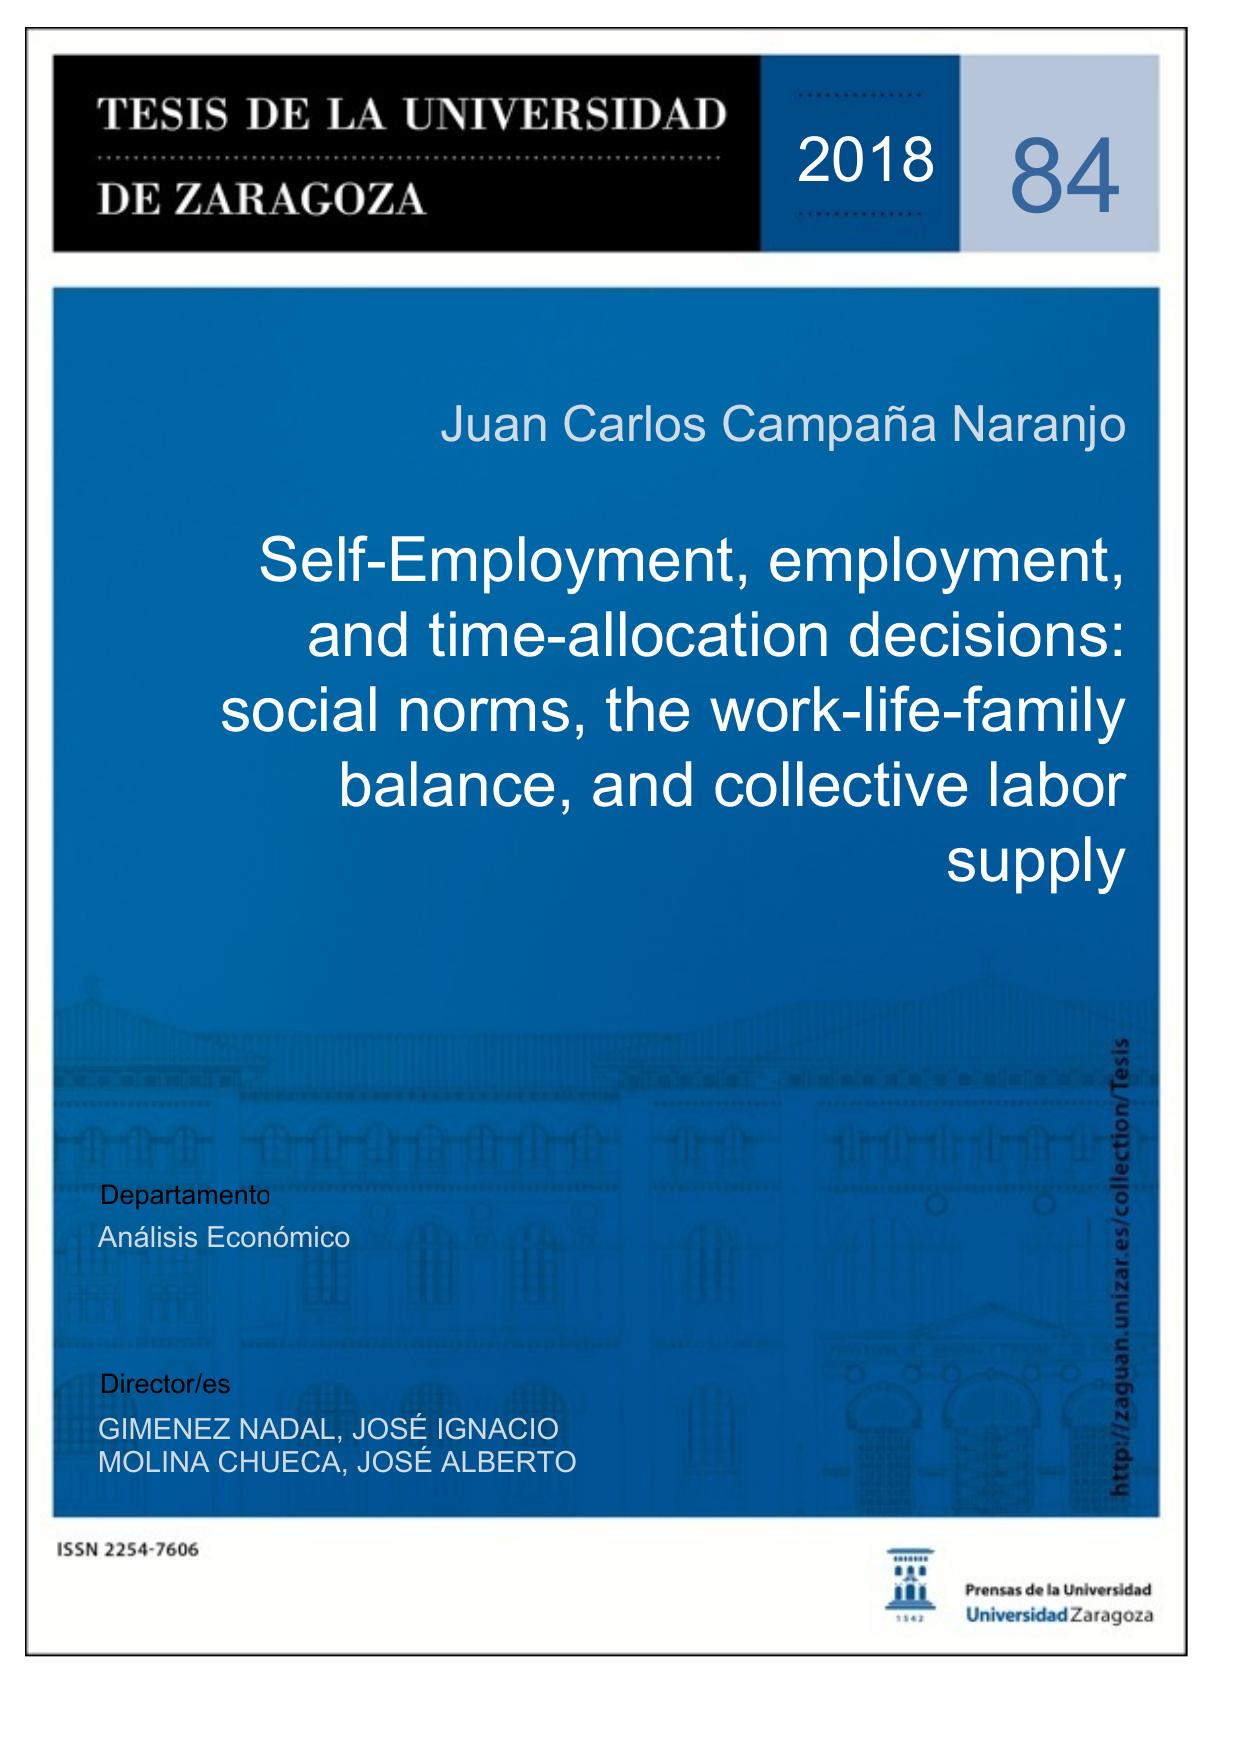 Self-Employment, employment, and time-allocation decisions: social norms, the work-life-family balance, and collective labor supply / Juan Carlos Campaña Naranjo